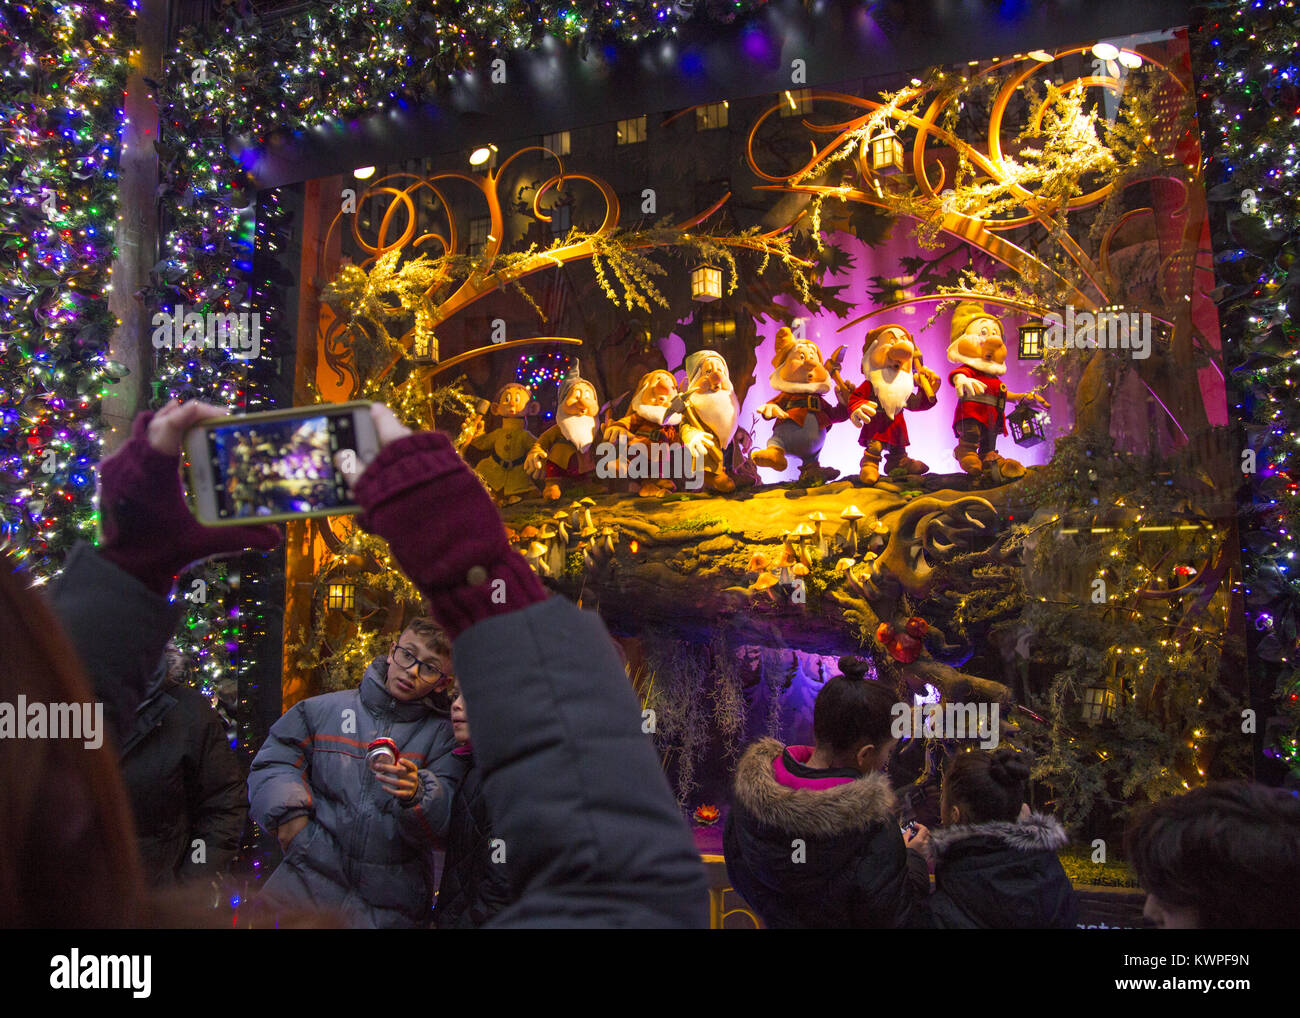 People take photos of 'The Seven Dwarfs'  in the Christmas holday display windows at Lord & Taylor on 5th Avenue in midtown Manhattan. Stock Photo